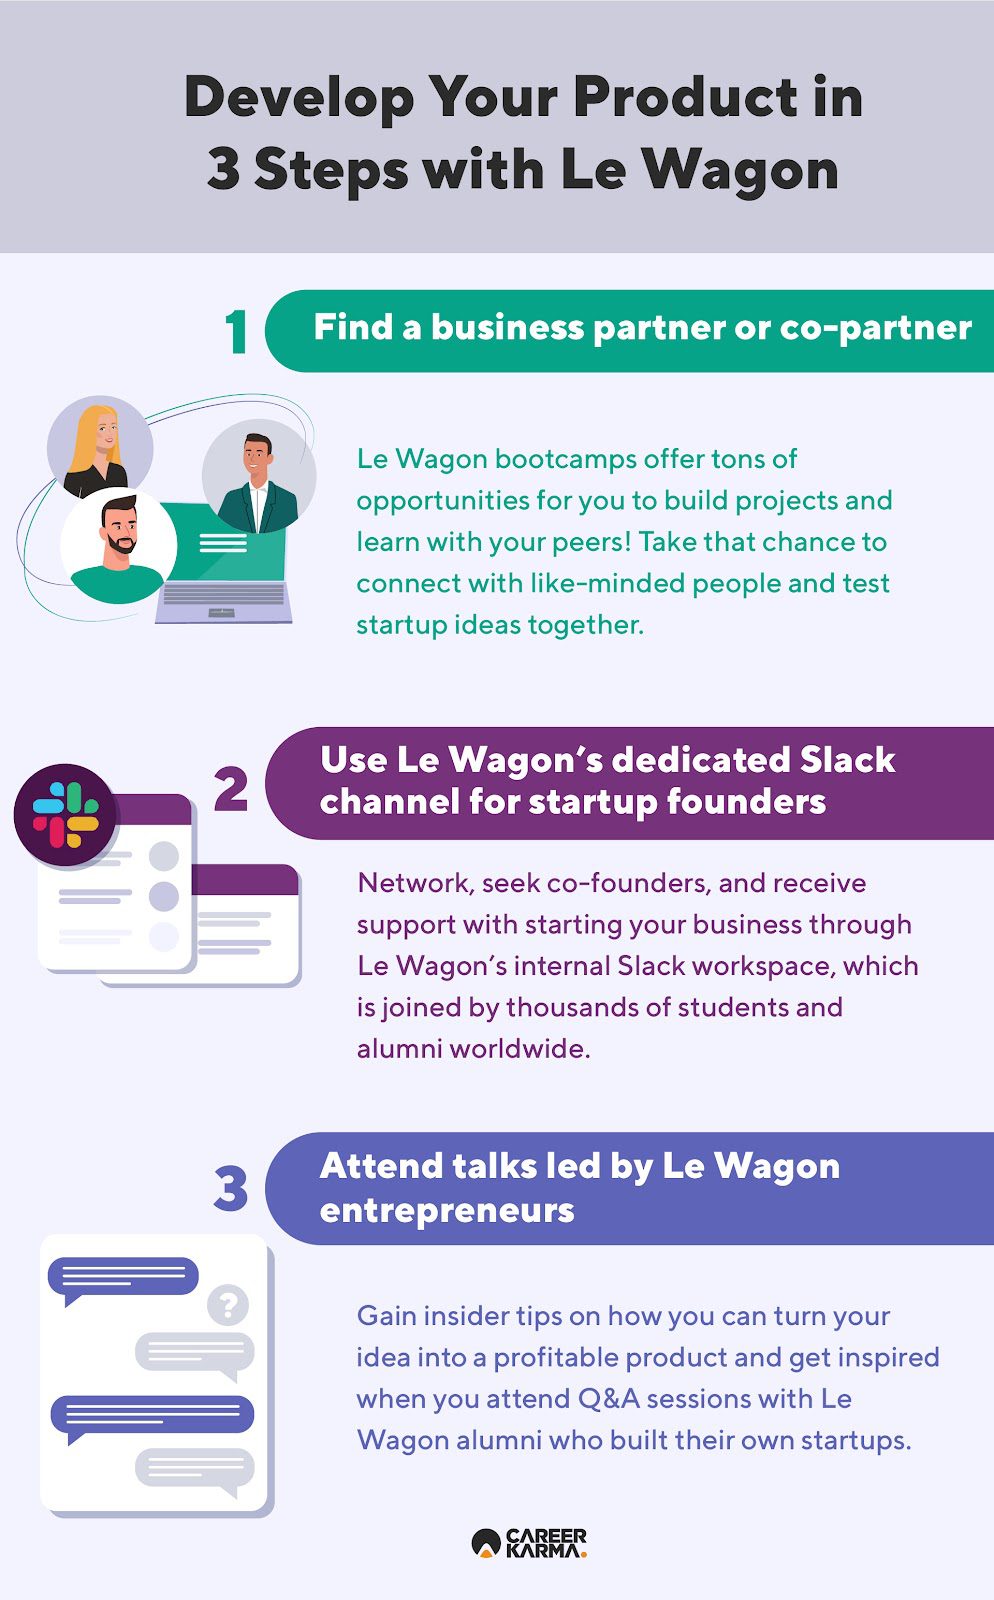 An infographic listing steps you can take to launch your startup with Le Wagon